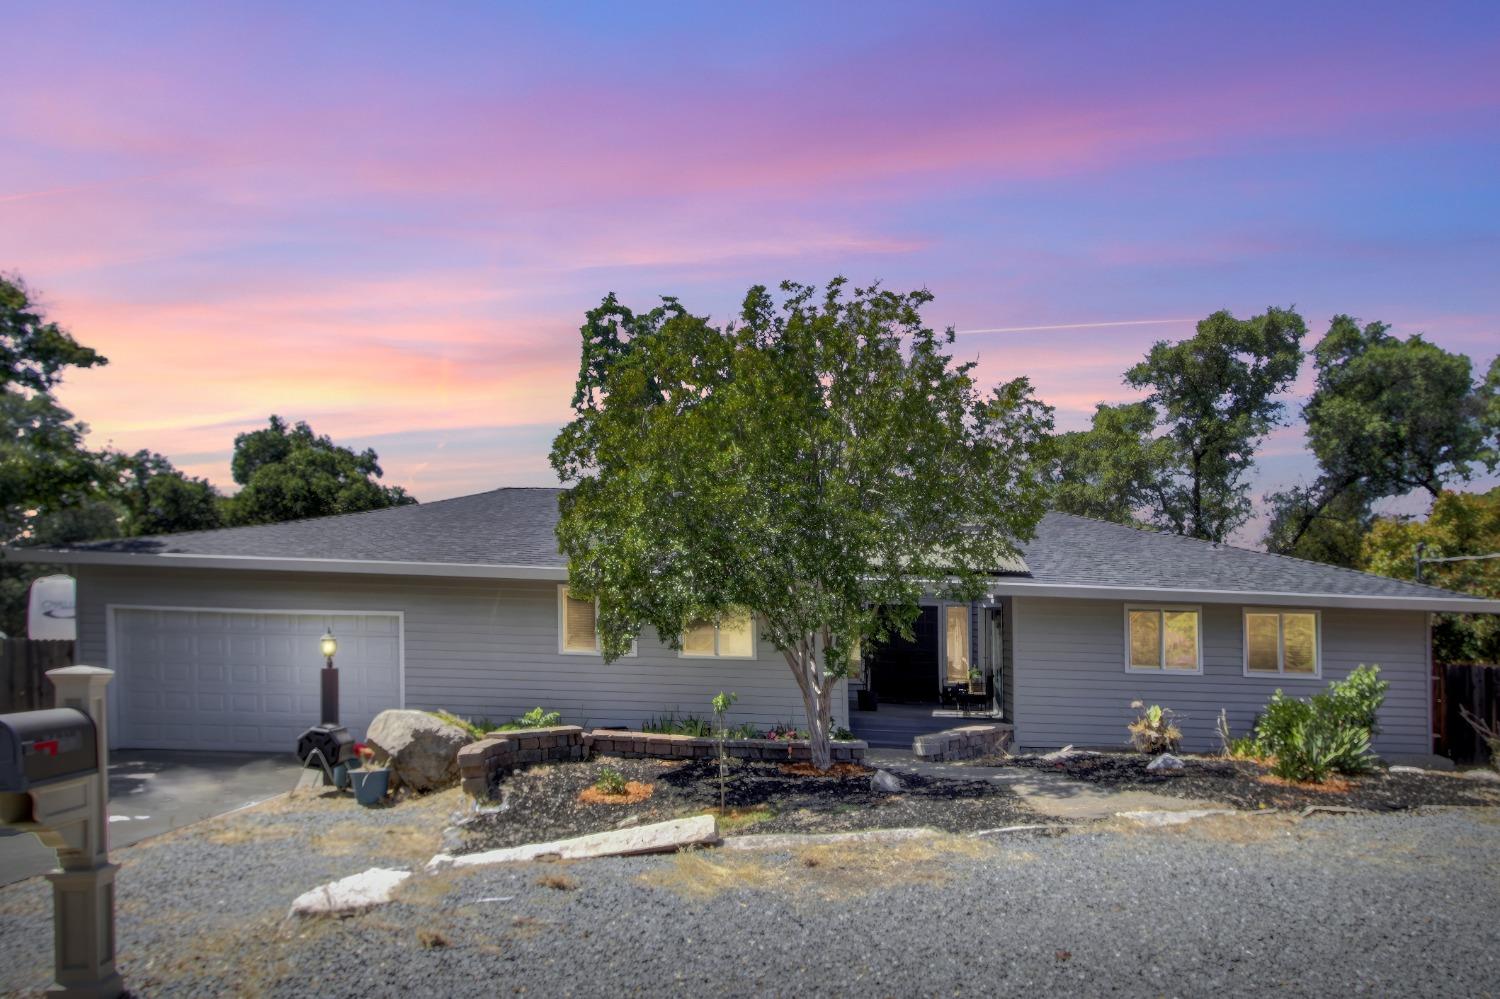 Photo of 4010 Creek View Ct in Rocklin, CA